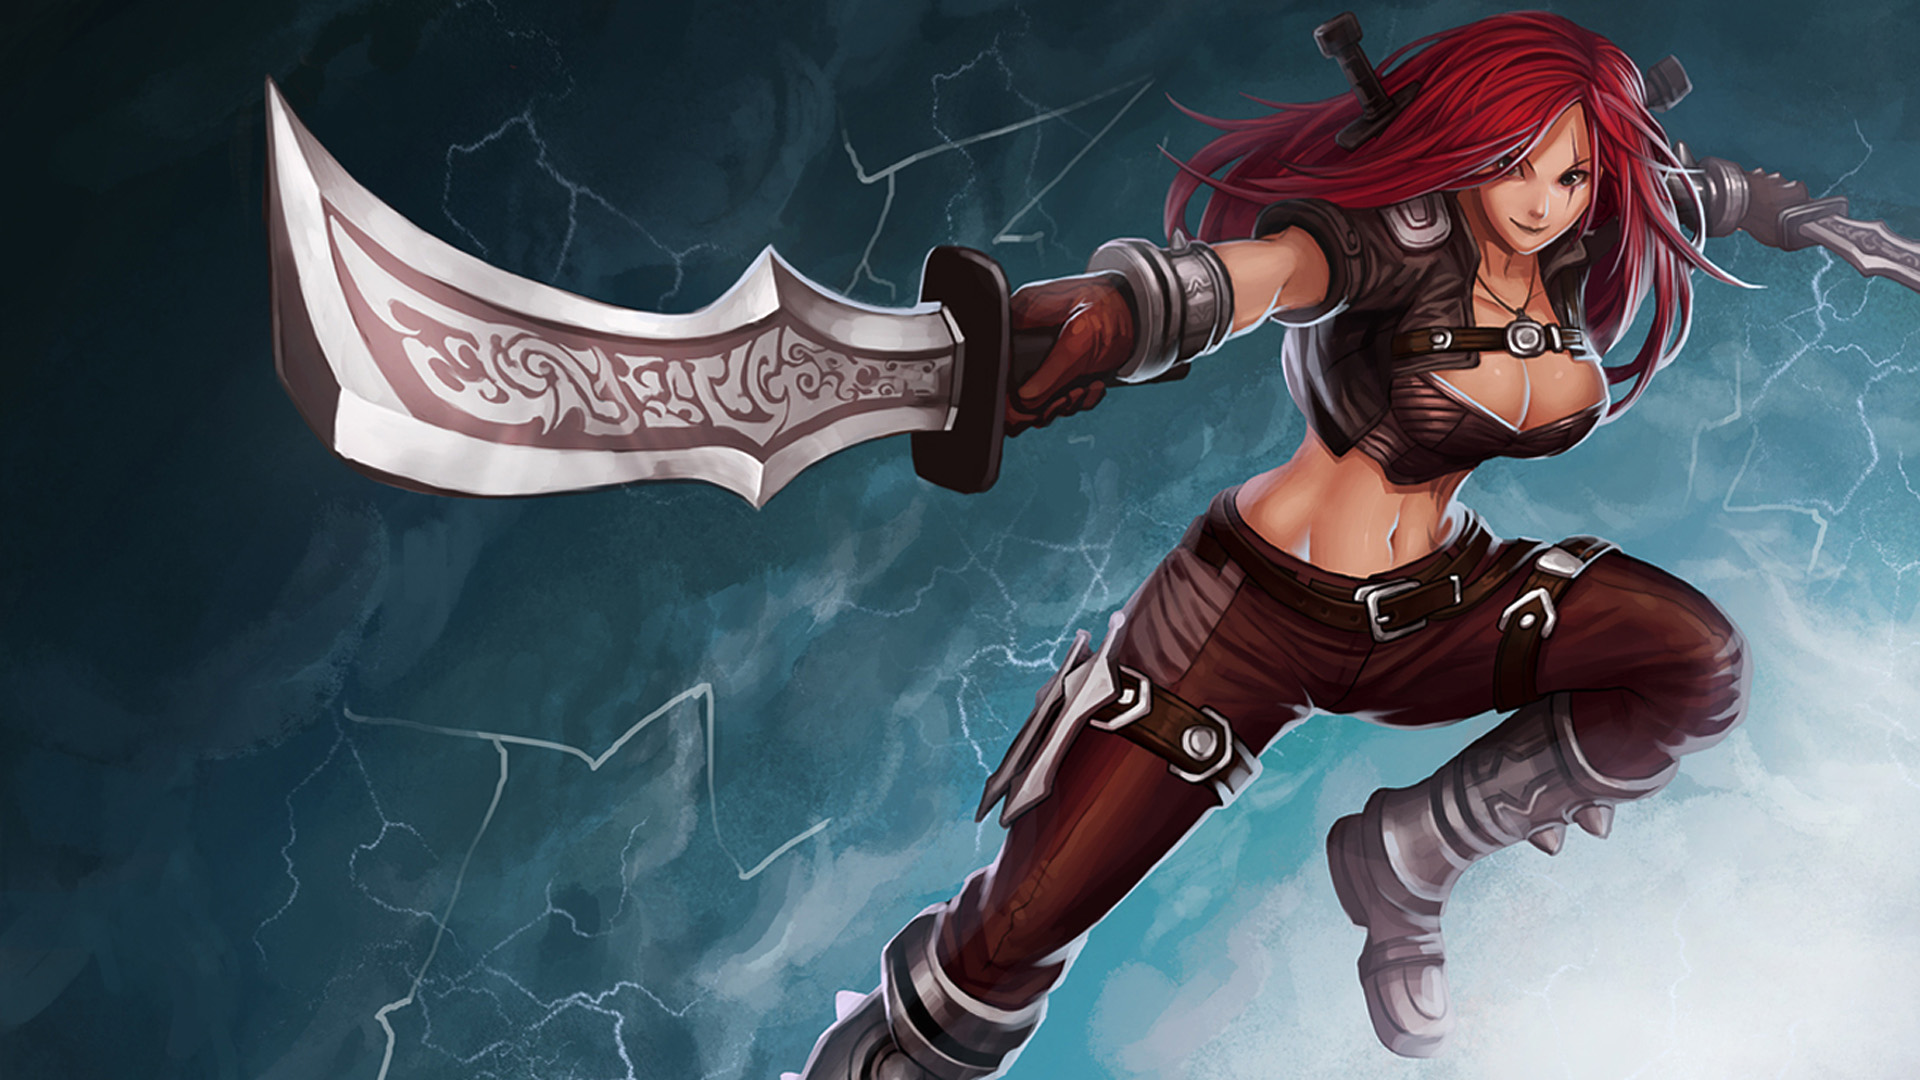 katarina wallpaper,cg artwork,fictional character,illustration,massively multiplayer online role playing game,games